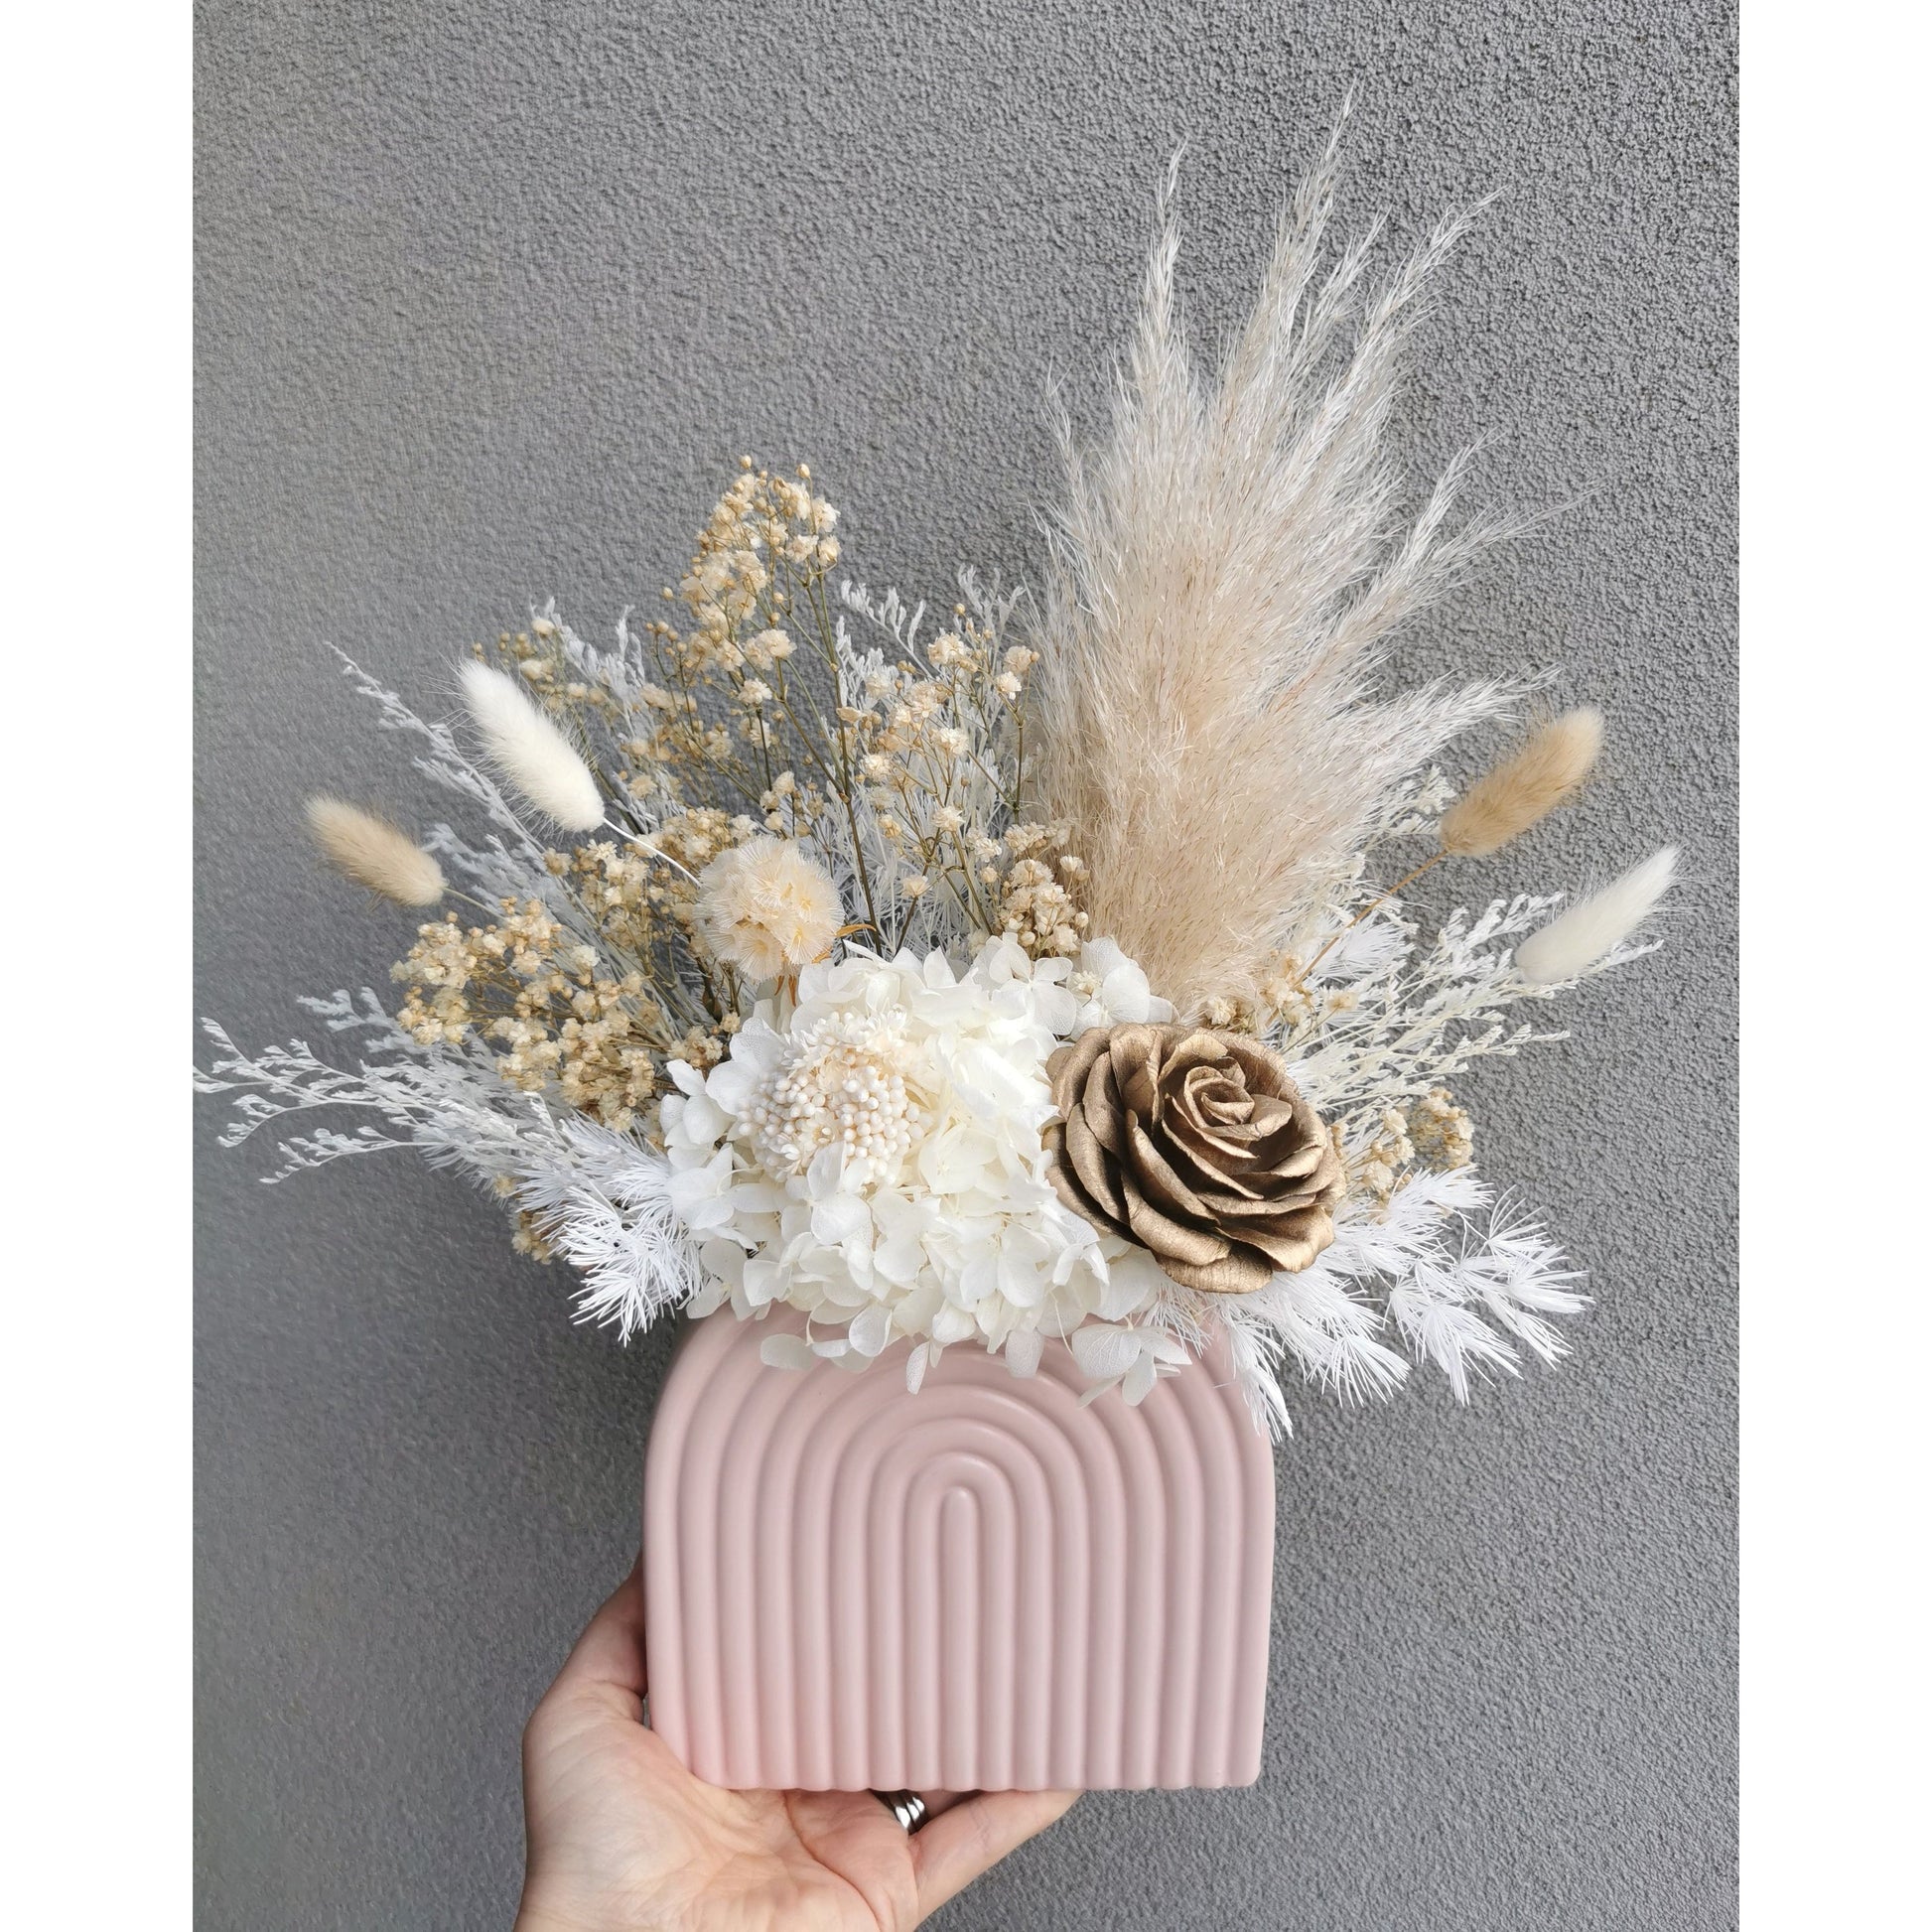 Natural beige and white dried & preserved flower arrangement featuring a gold sola wood flower rose and set in to a pink arch vase. Photo shows arrangement being held by hand against a blank wall